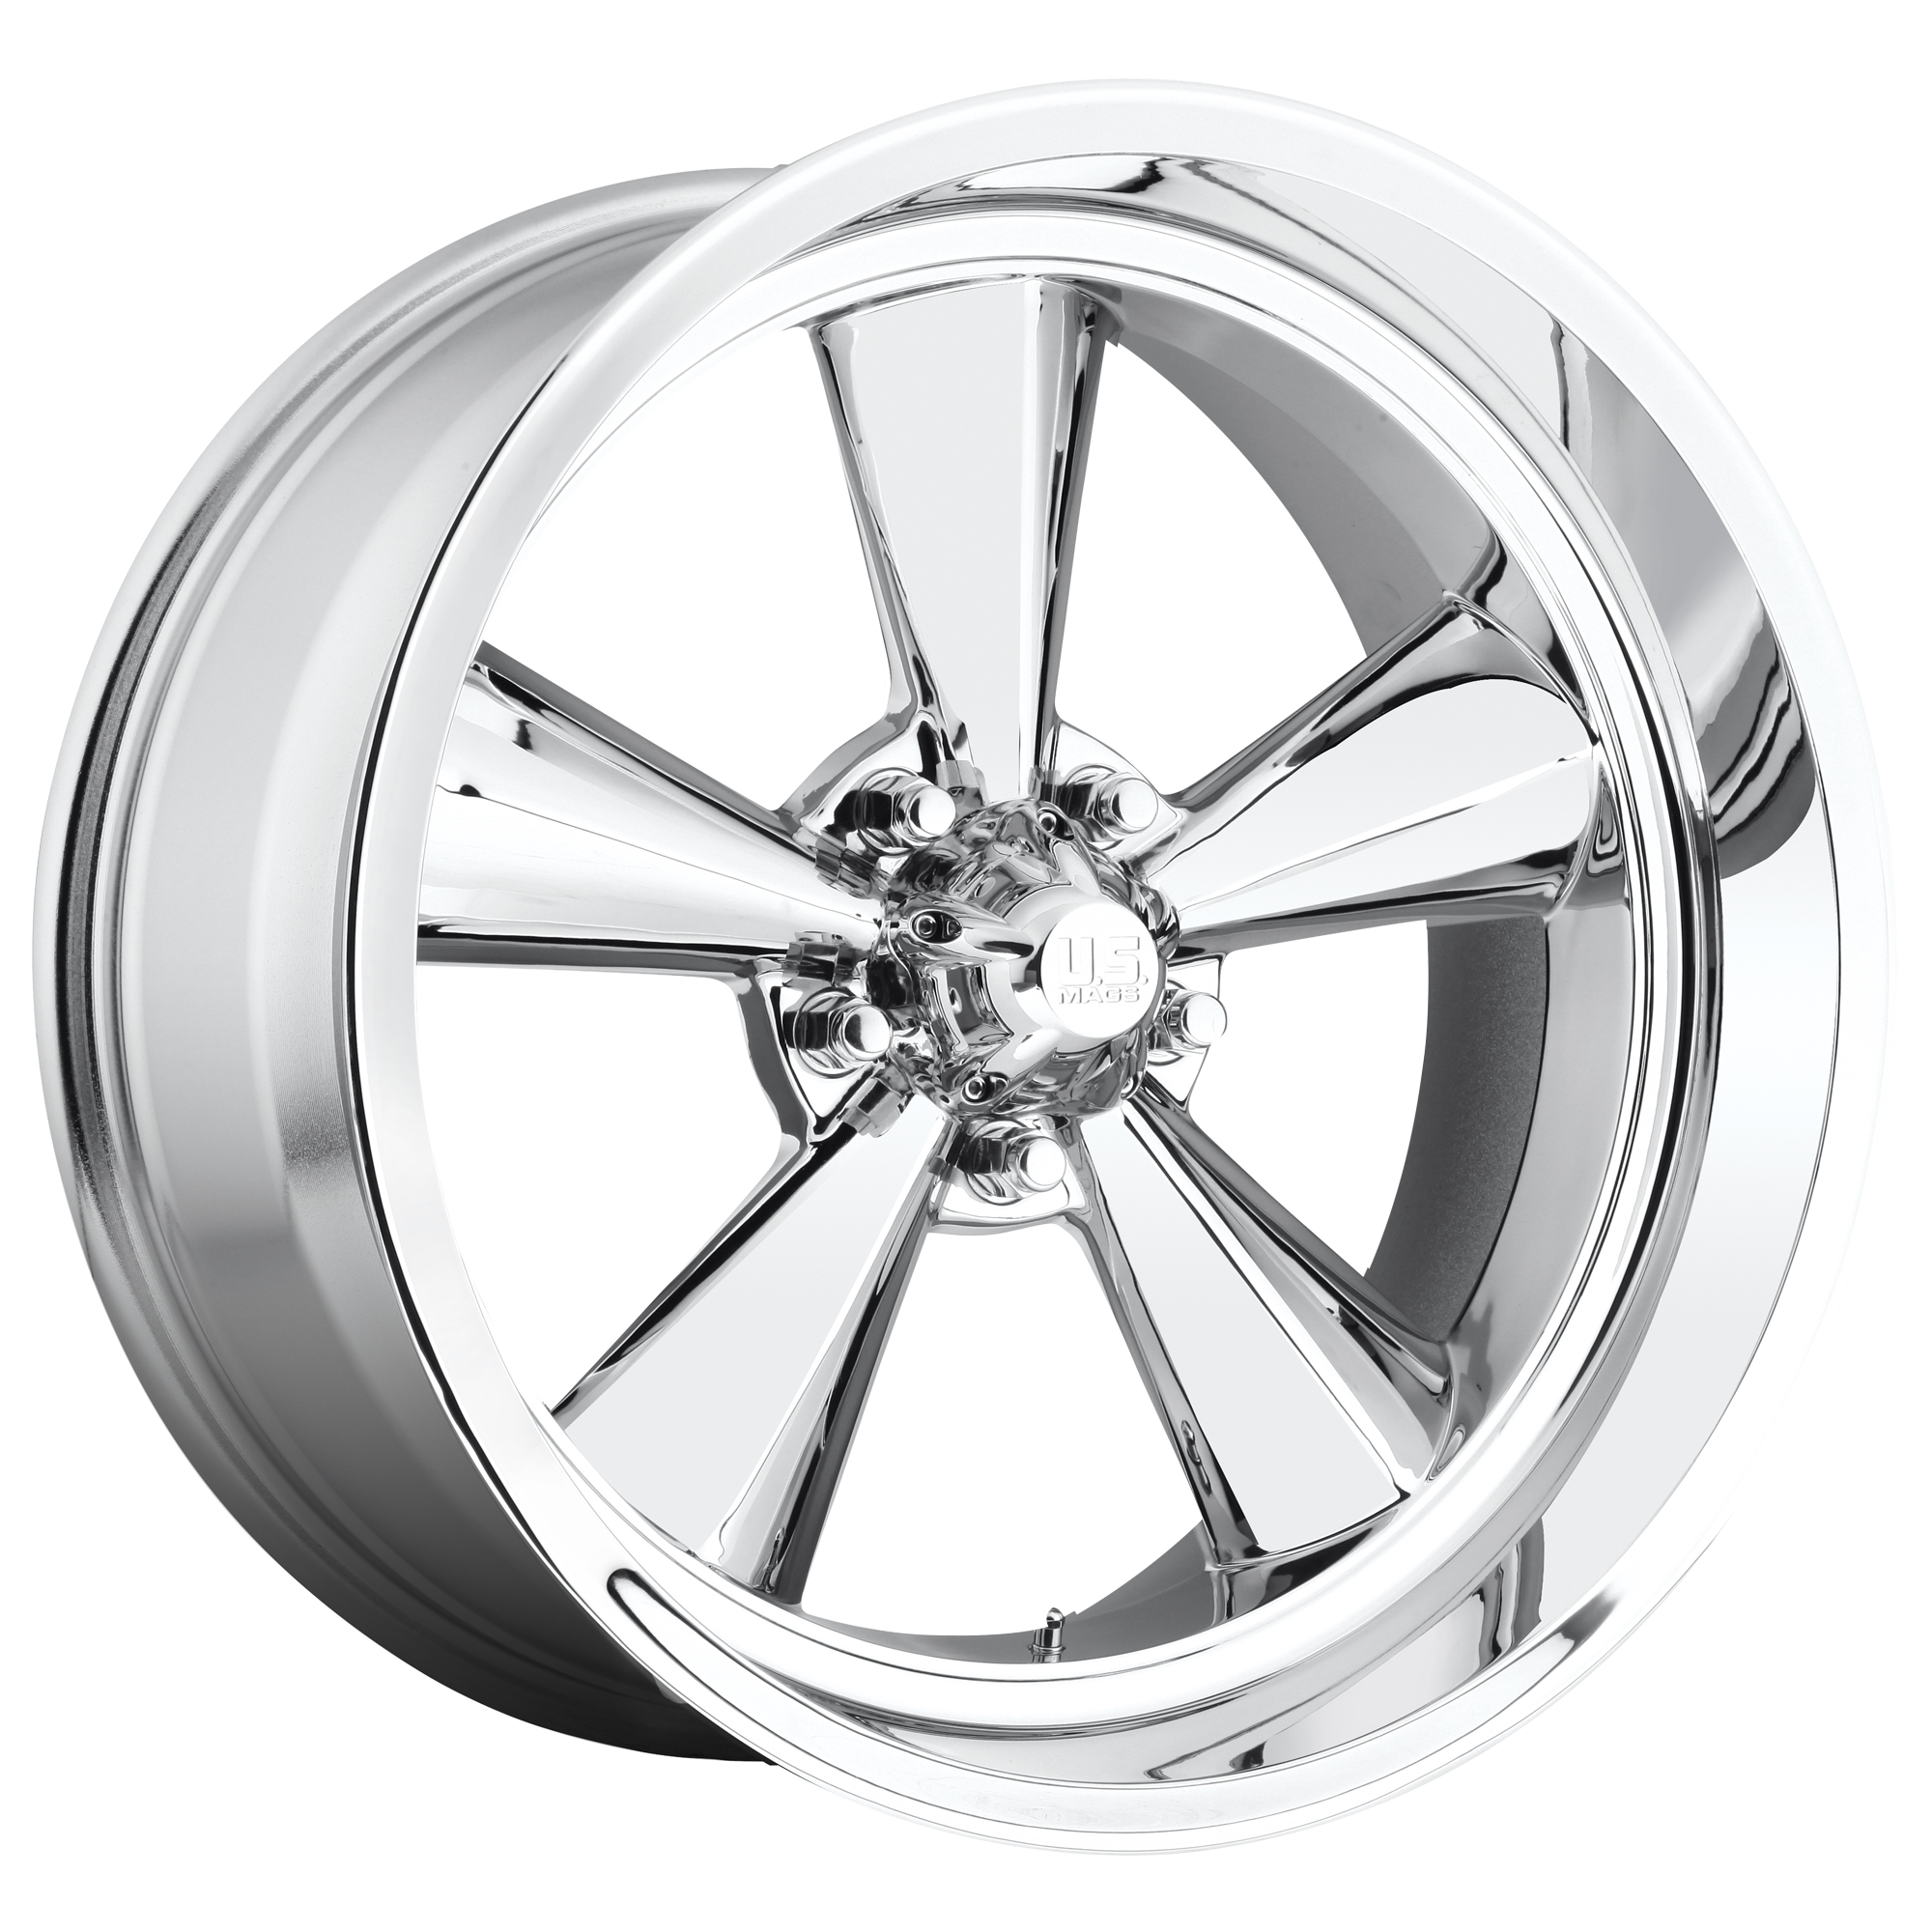 STANDARD 18x8 5x120.65 CHROME PLATED (1 mm) - Tires and Engine Performance